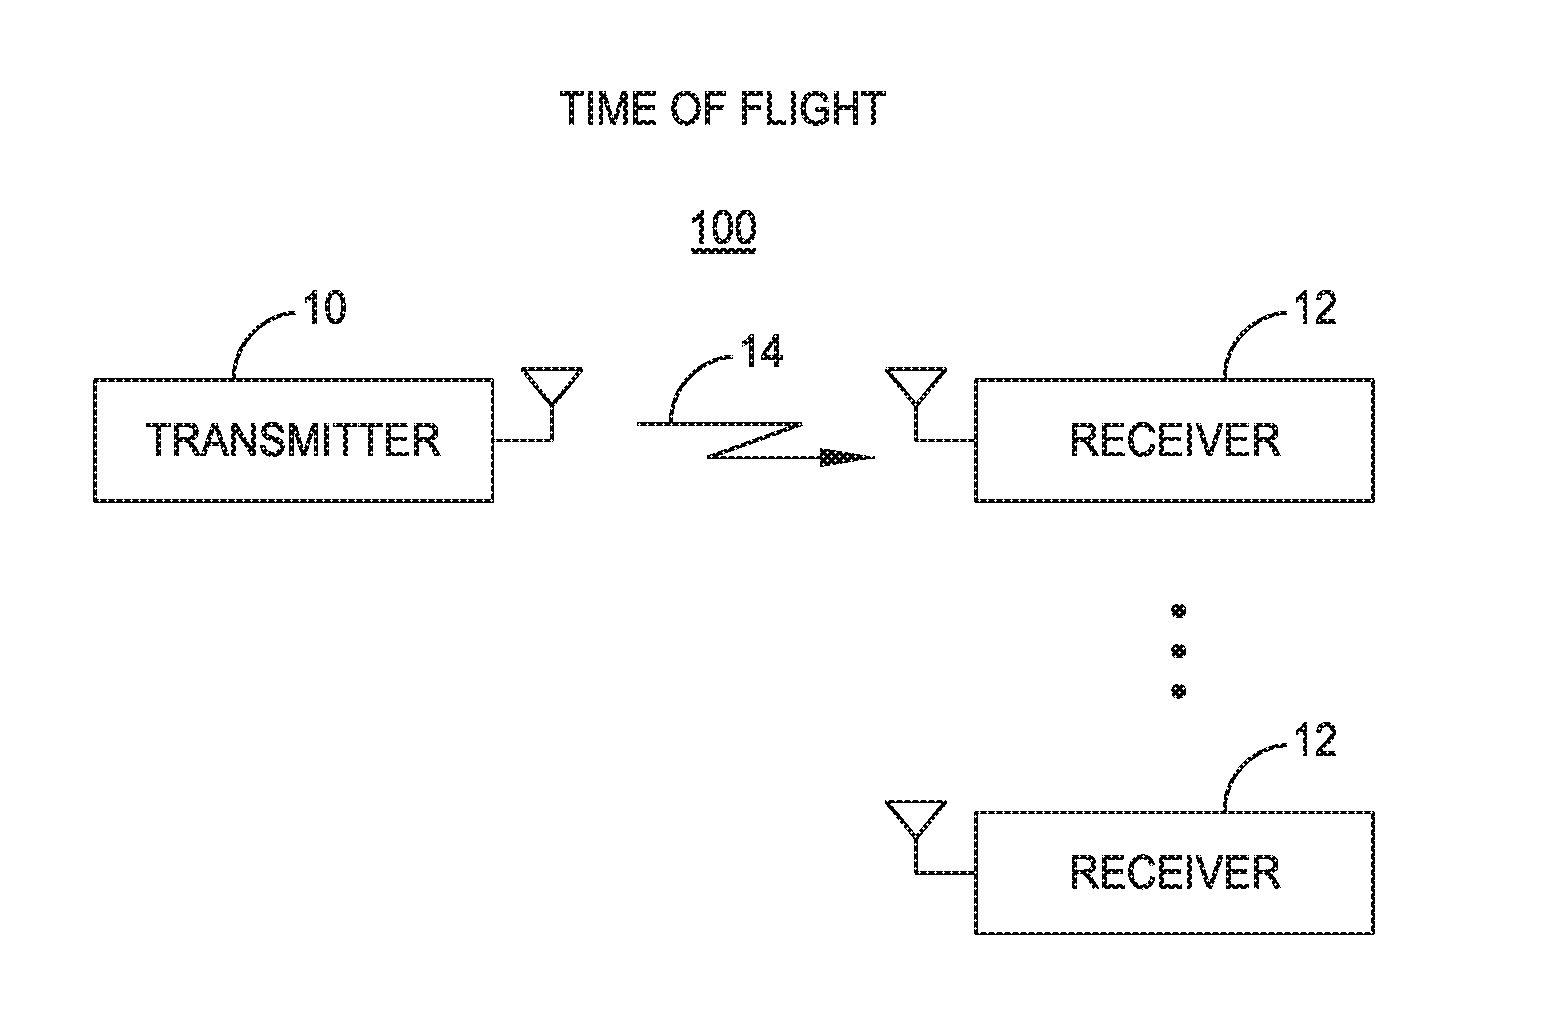 High-precision time of flight measurement systems